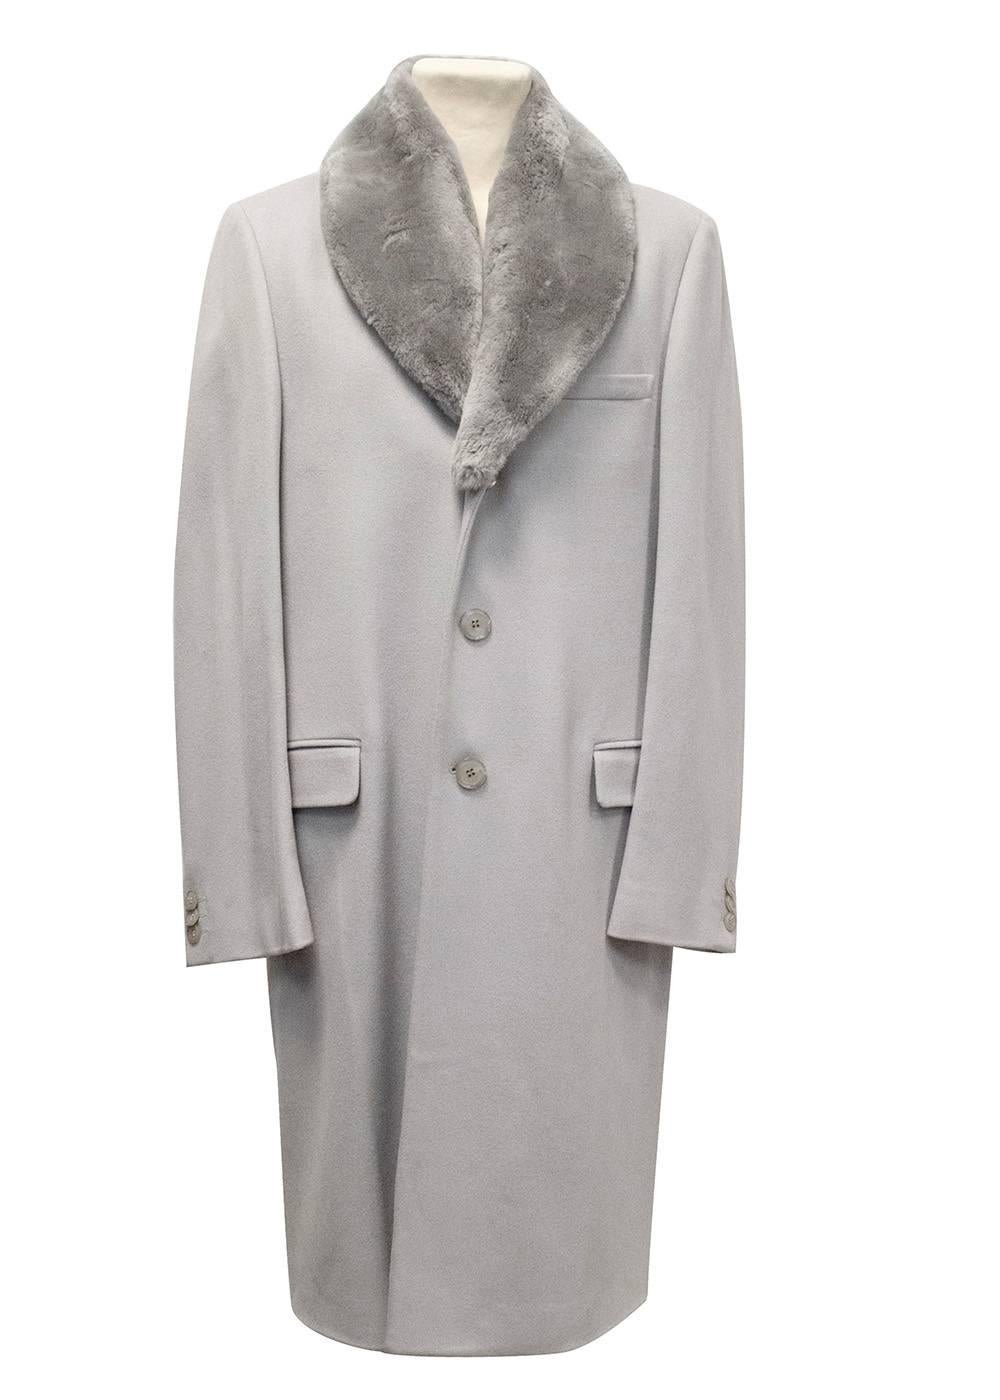 Gianni Versace grey coat with detachable Castorino fur collar. Relaxed fit, medium weight and fully lined with two flap pockets, two button closure and a single vent. EU 48/ M

Please note, small scuff to material on right sleeve. 
Two very tiny